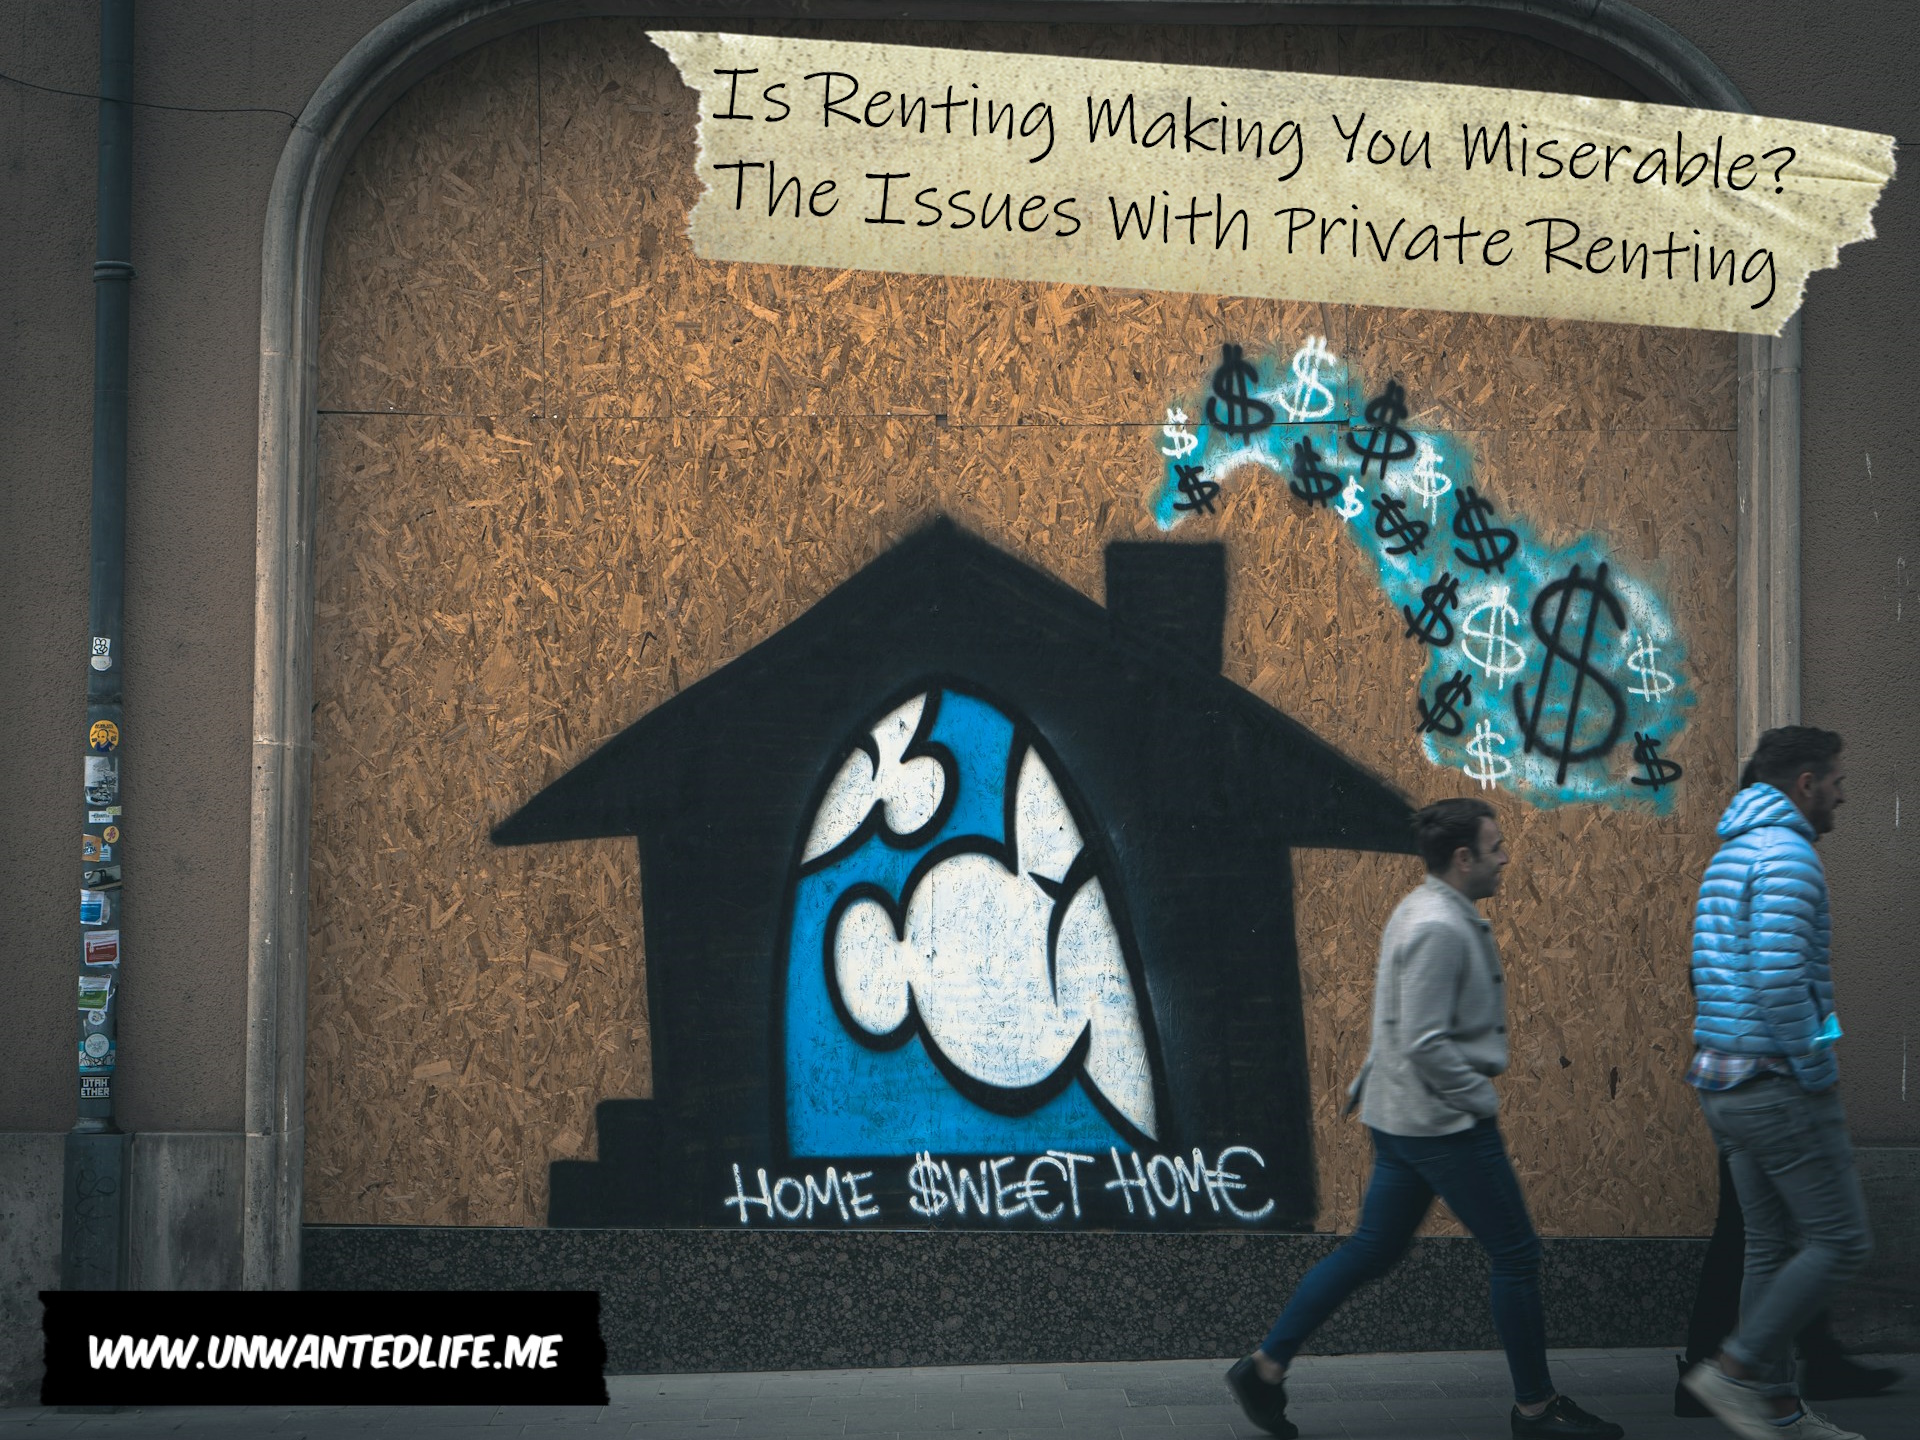 A photo of graffiti of a house with money coming out of the chimney. The graffiti also says "Home Sweet Home" with some of the letters replaced with money signs. The image represents the topic of the article - Is Renting Making You Miserable? The Issues With Private Renting